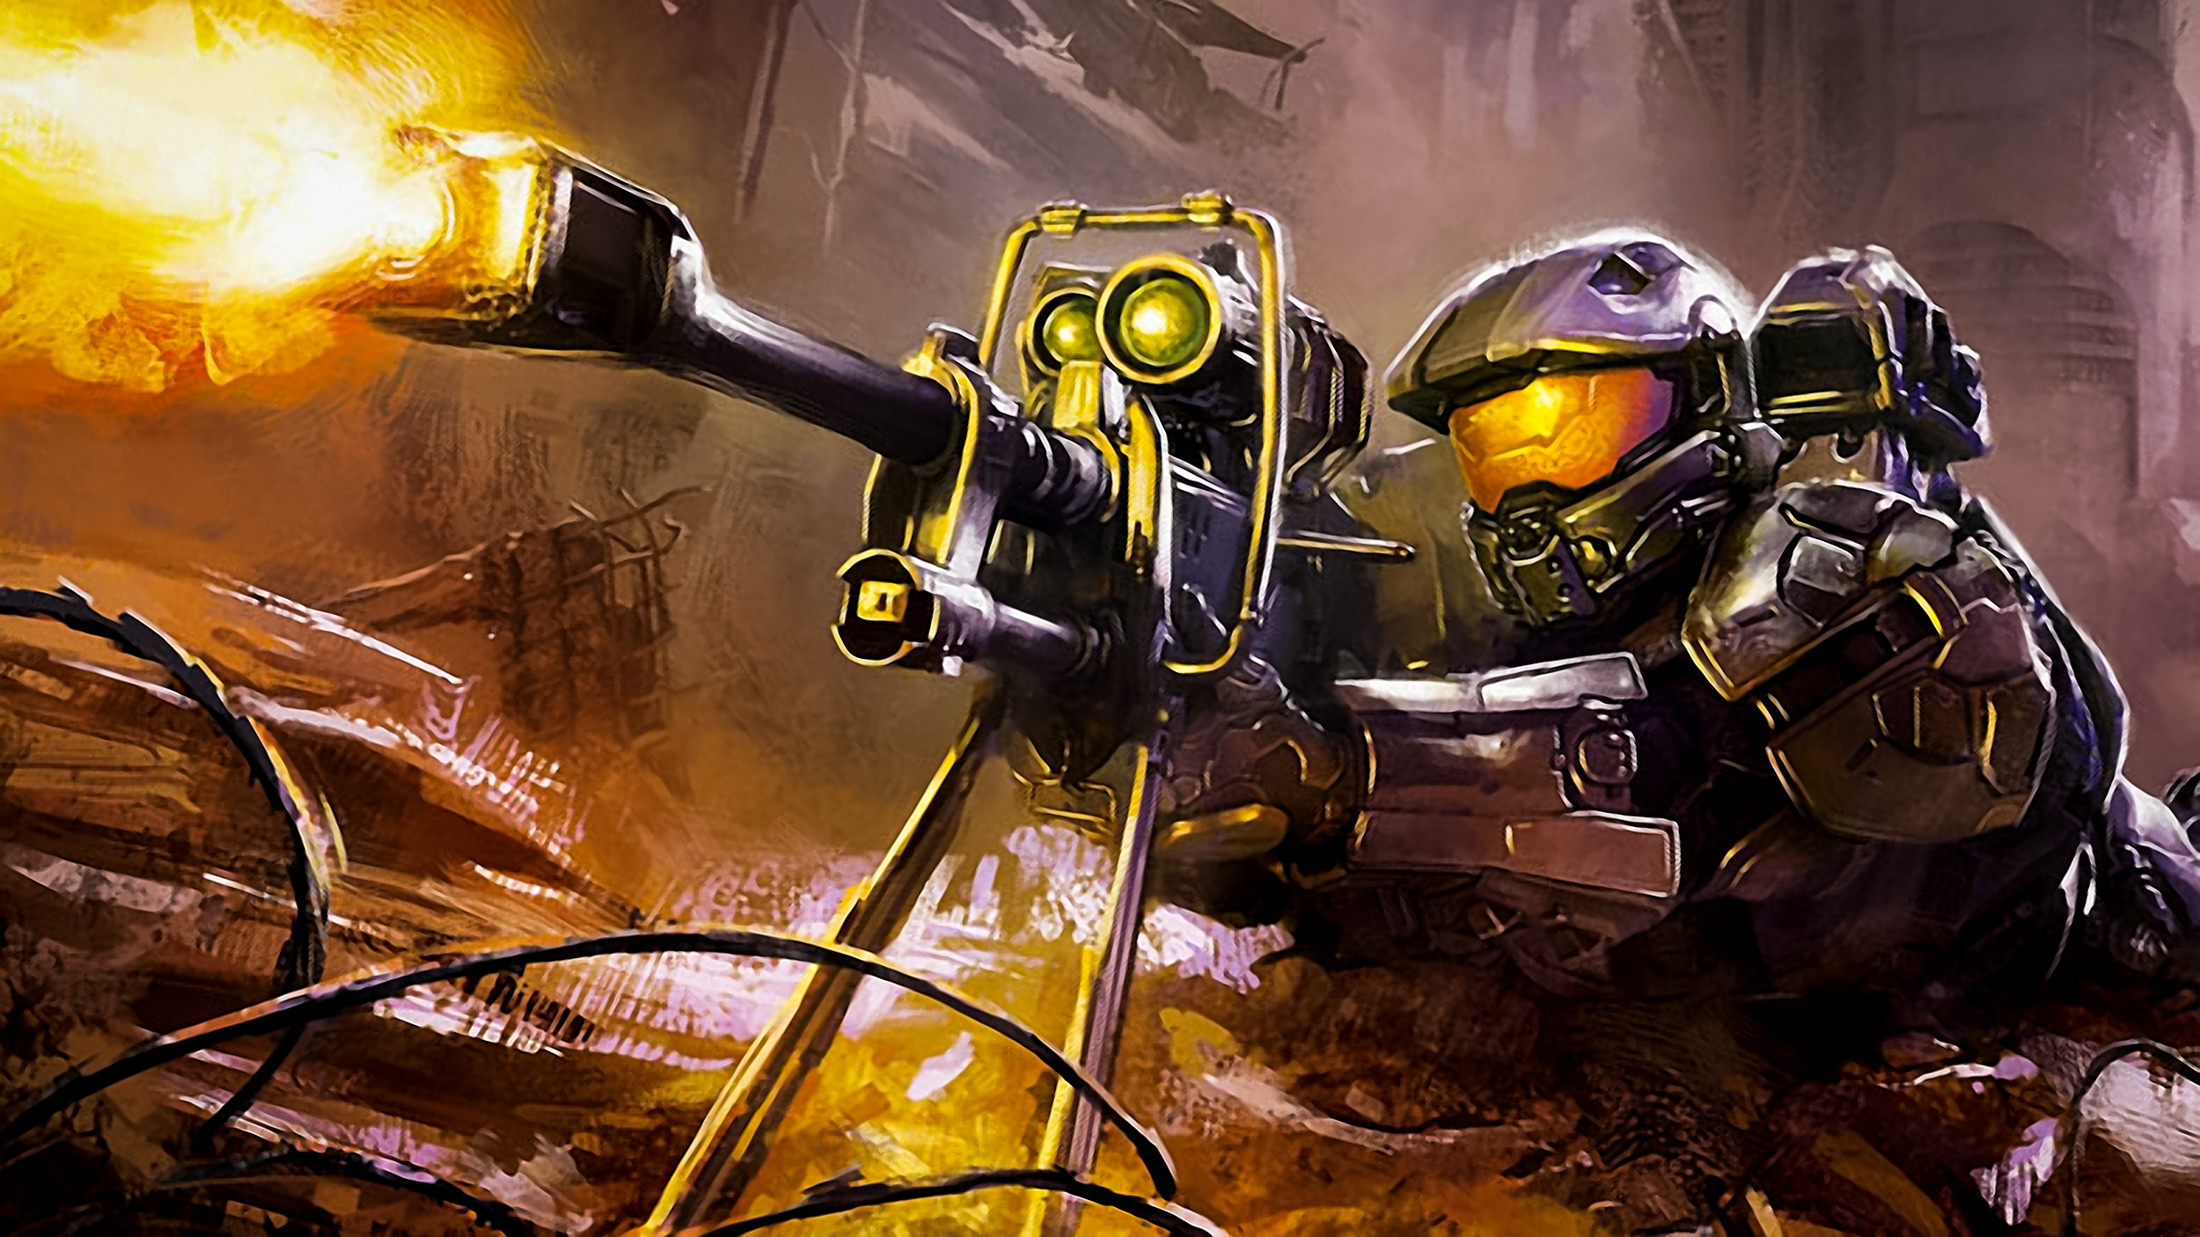 Halo The Master Chief Wallpapers